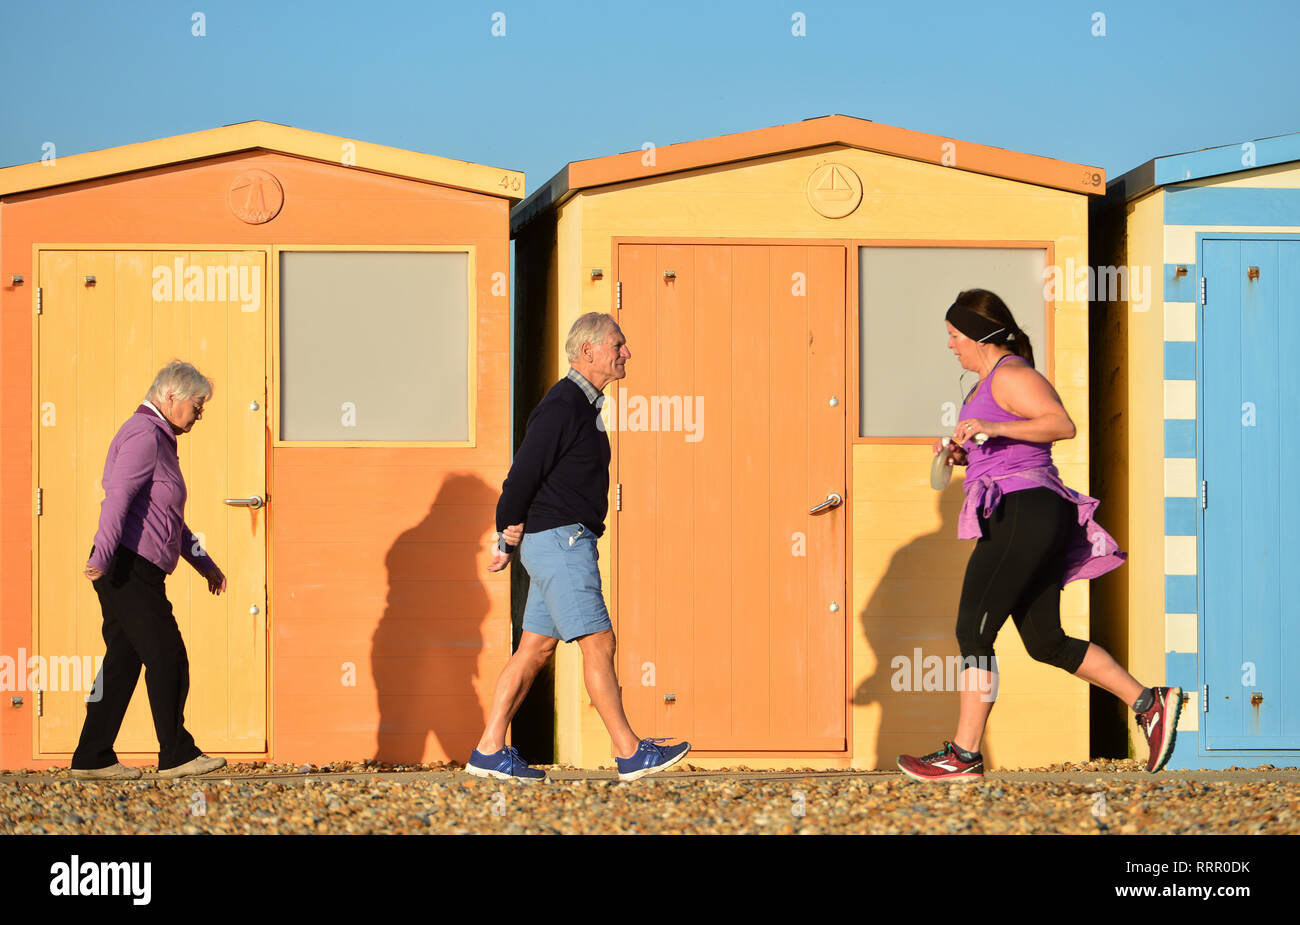 Seaford, East Sussex, UK. 26th Feb, 2019. People enjoying the warm sun in Seaford, East Sussex, on the hottest winter day on record. Credit: Peter Cripps/Alamy Live News Stock Photo